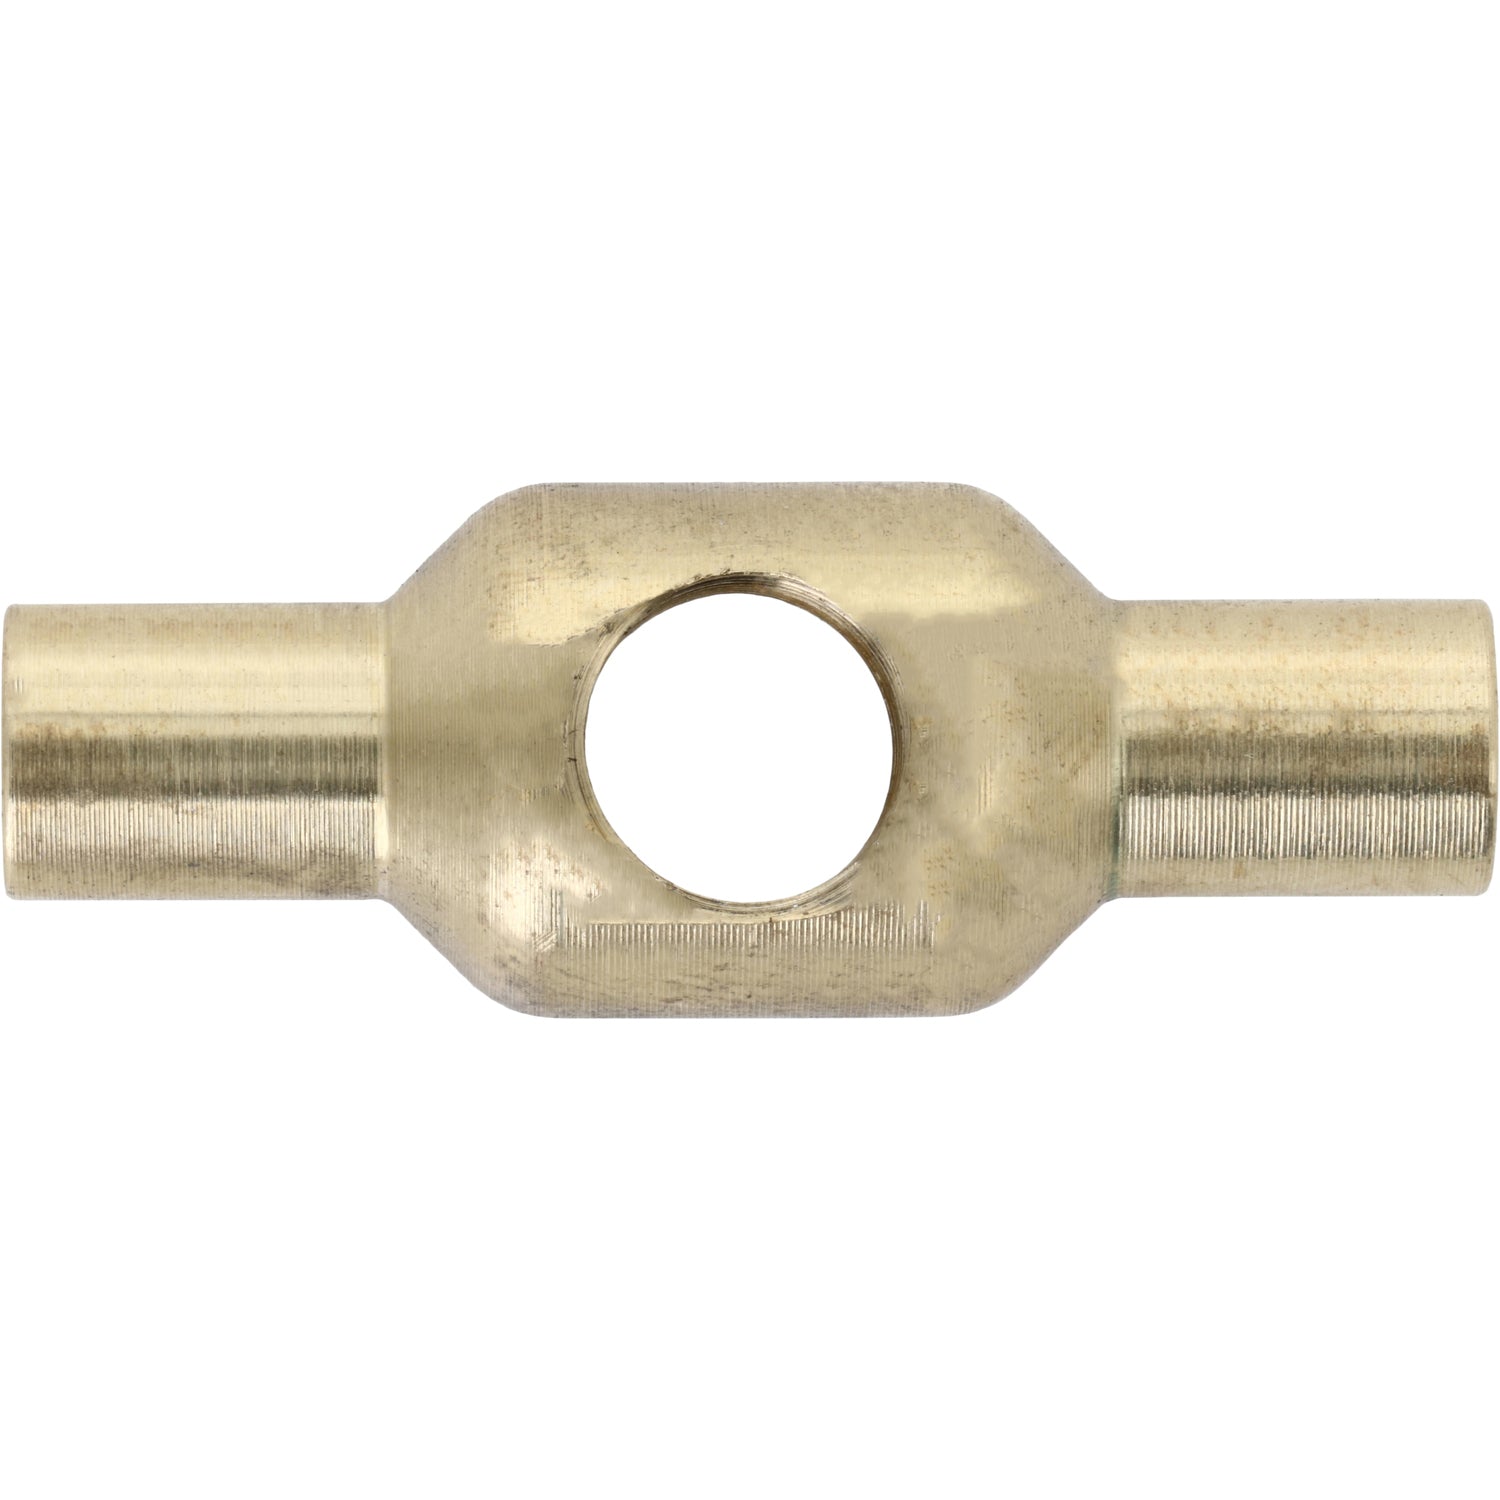 Brass cylindrical part with ends that have a smaller diameter than the center of the part. A threaded hole passes through the center of the part. Part shown on white background.